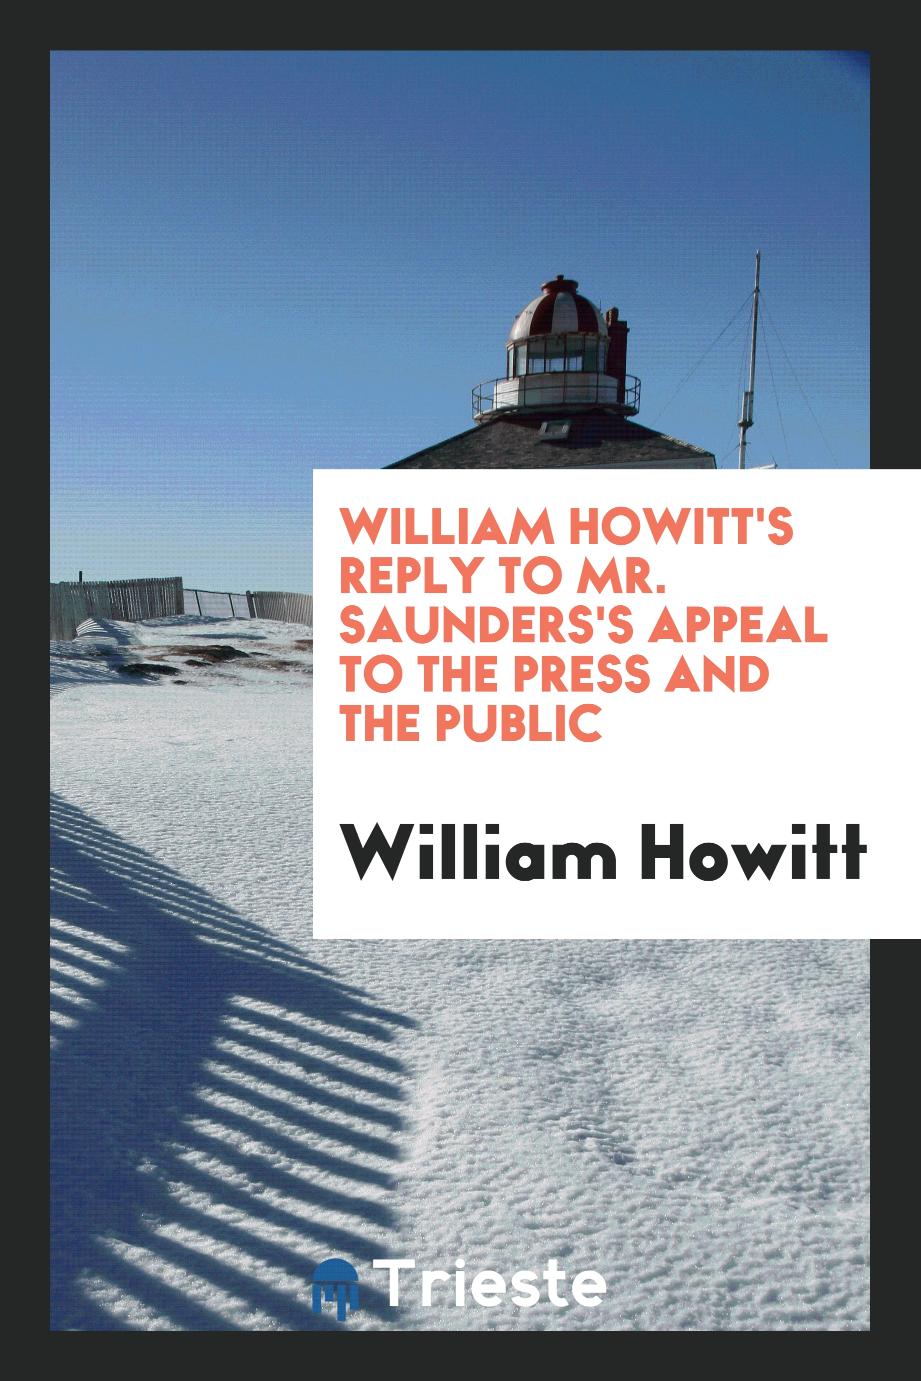 William Howitt's reply to Mr. Saunders's appeal to the press and the public